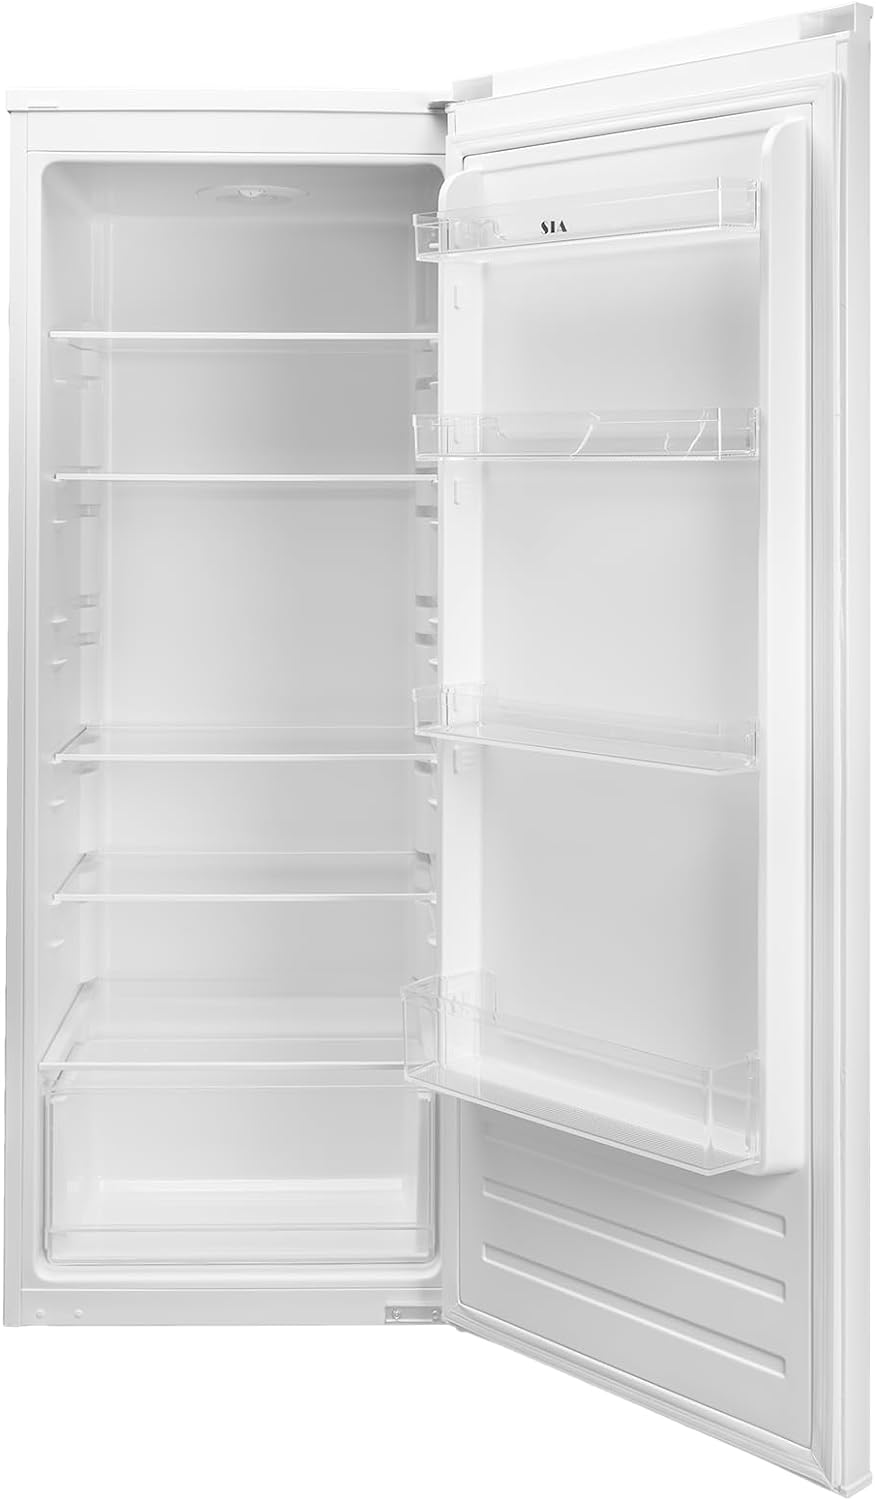 SIA Freestanding White Tall Larder Fridge Single Door 160L Energy F SLF144WH, 4 glass shelves, salad crisper and 3 door compartments. 228L gross storage, noise level 41dB, 2 Year Guarantee - Amazing Gadgets Outlet